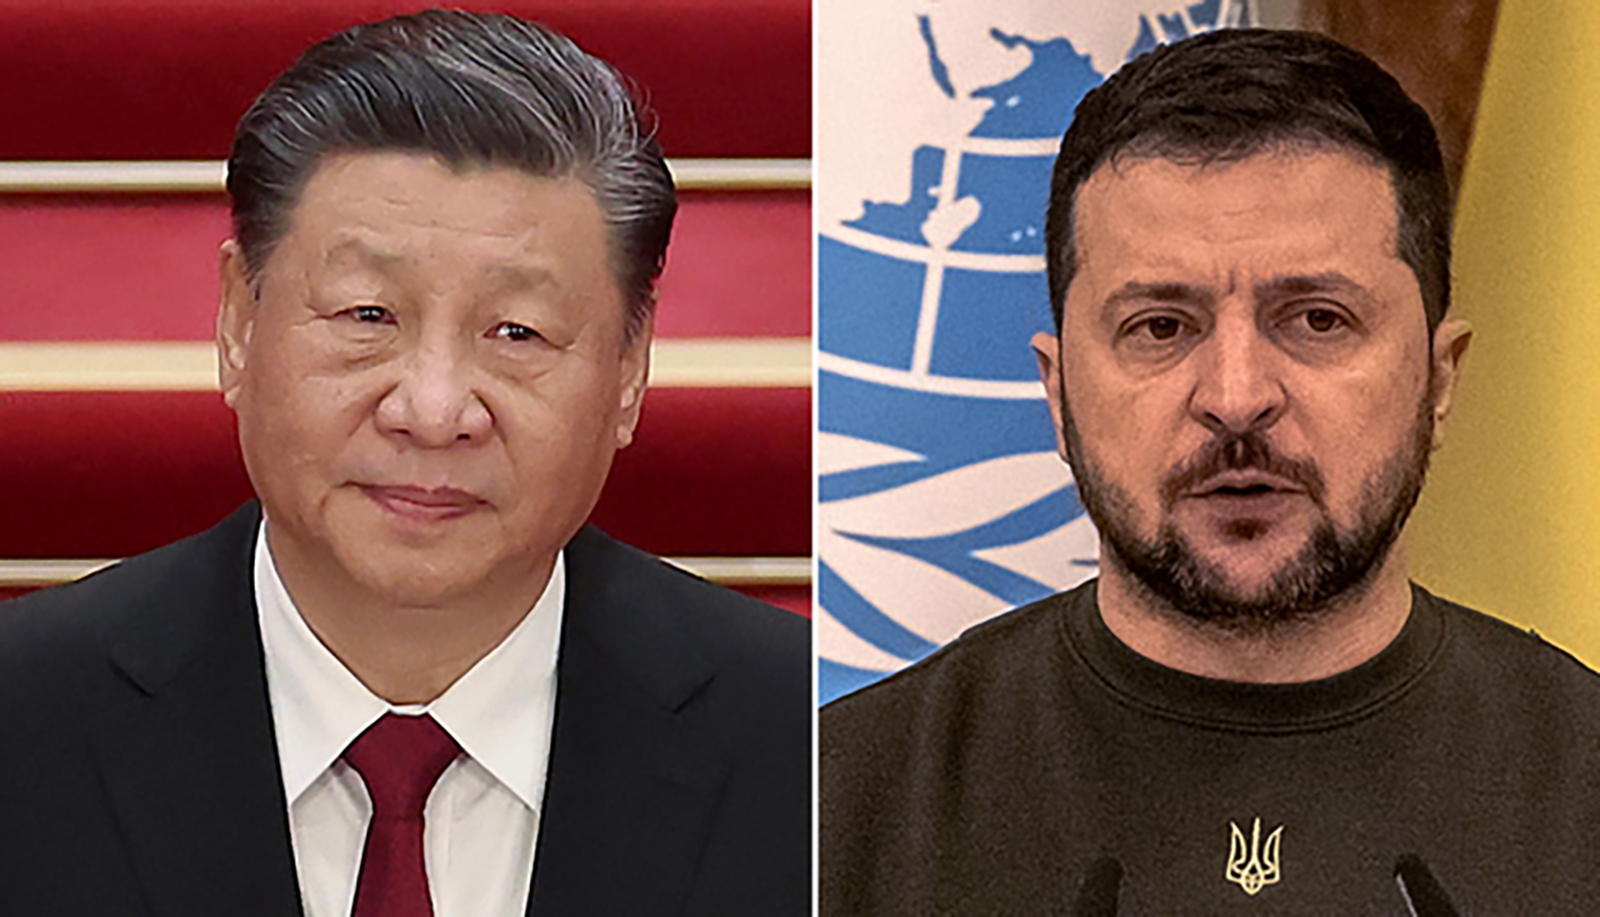 From left, Xi Jinping and Volodymyr Zelensky.